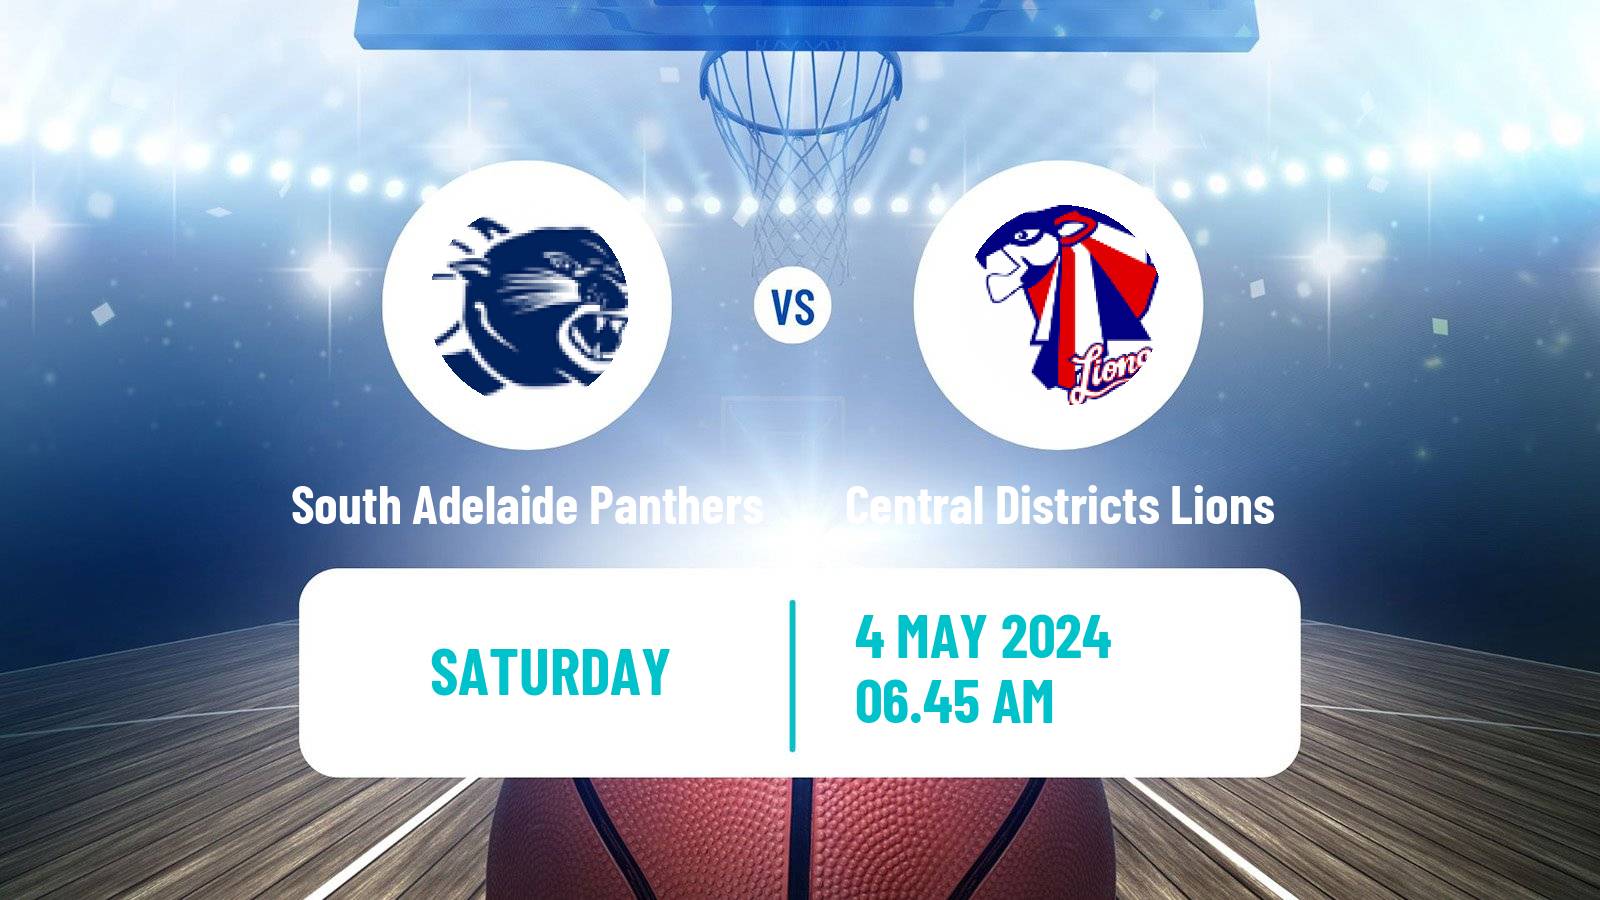 Basketball Australian NBL1 Central Women South Adelaide Panthers - Central Districts Lions